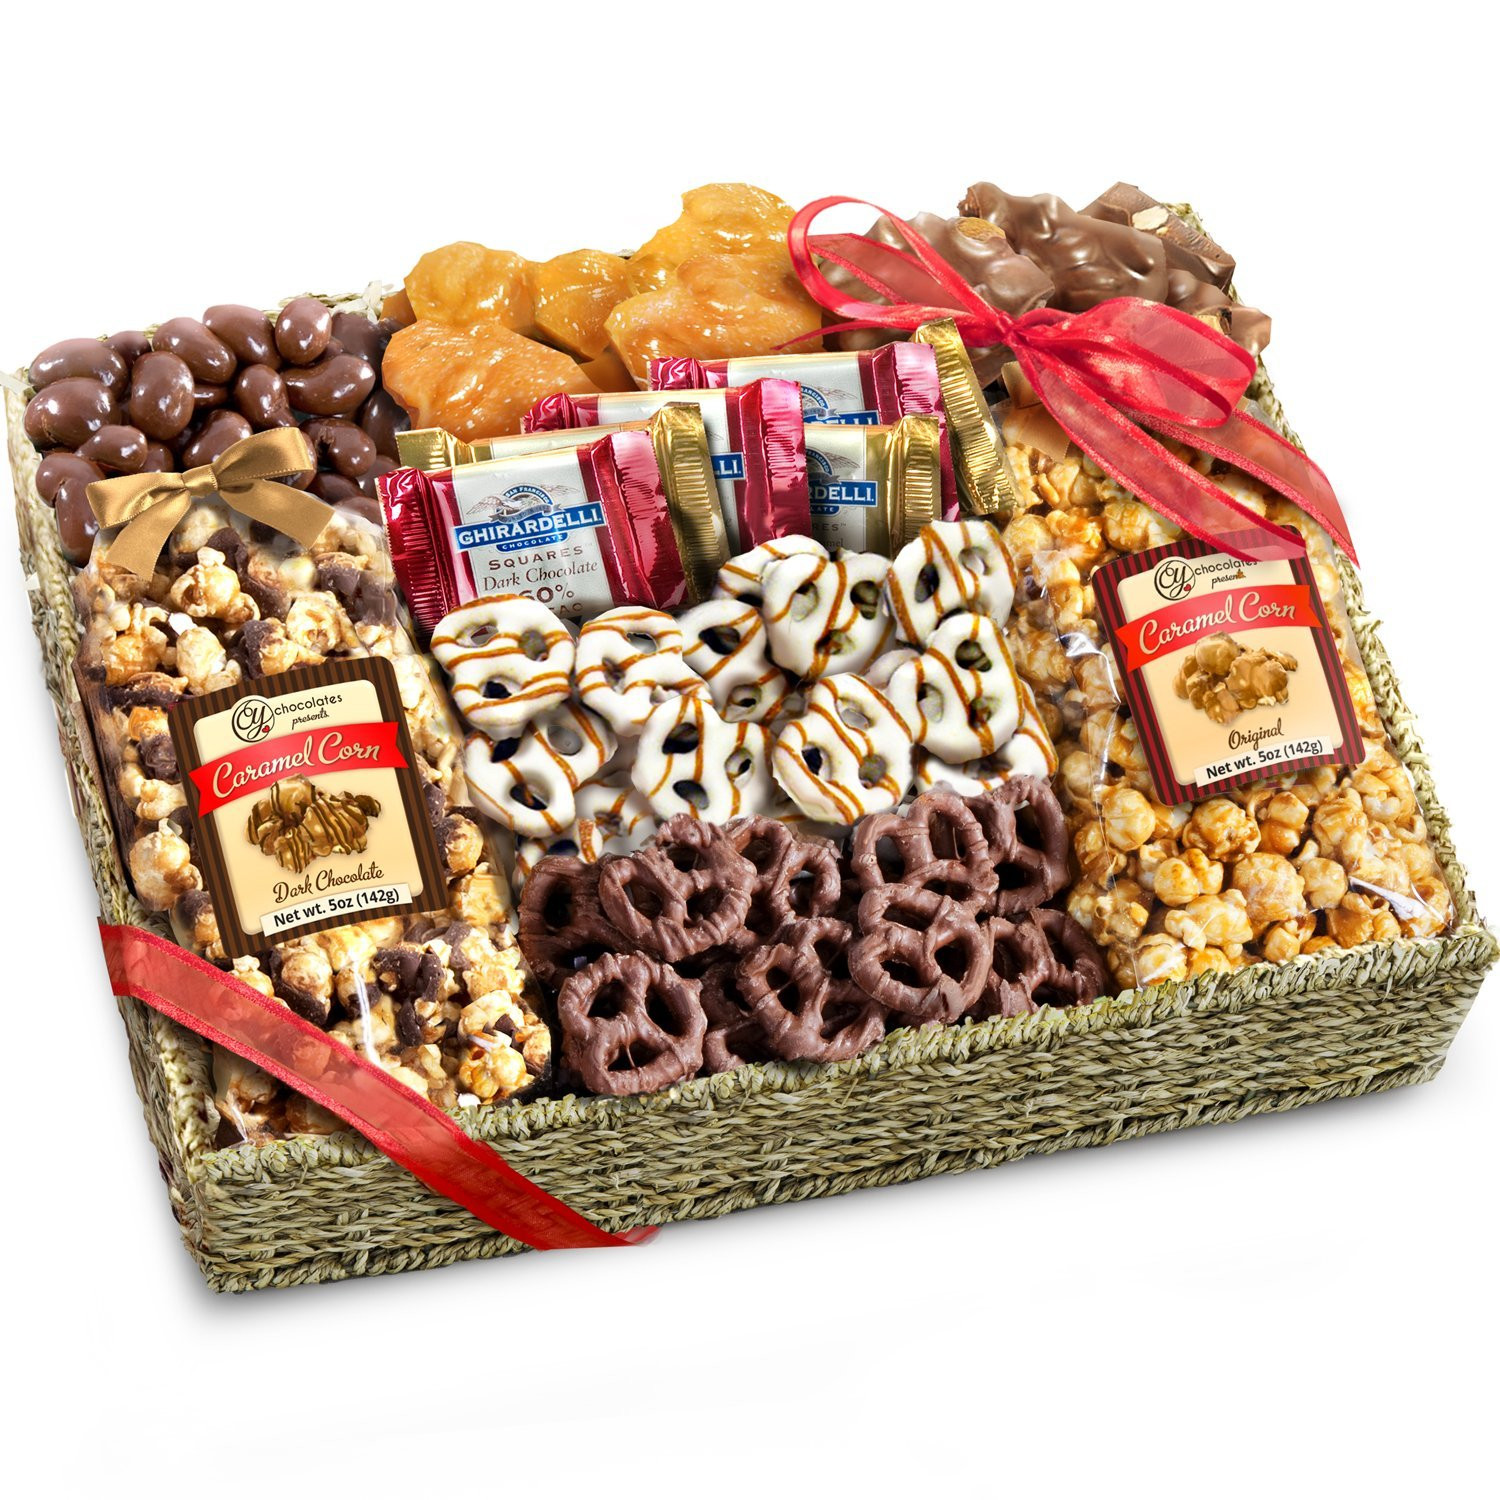 Food Gifts For Christmas To Be Delivered
 Cookie Gift Boxes & Baskets Best Holiday Treats Snacks